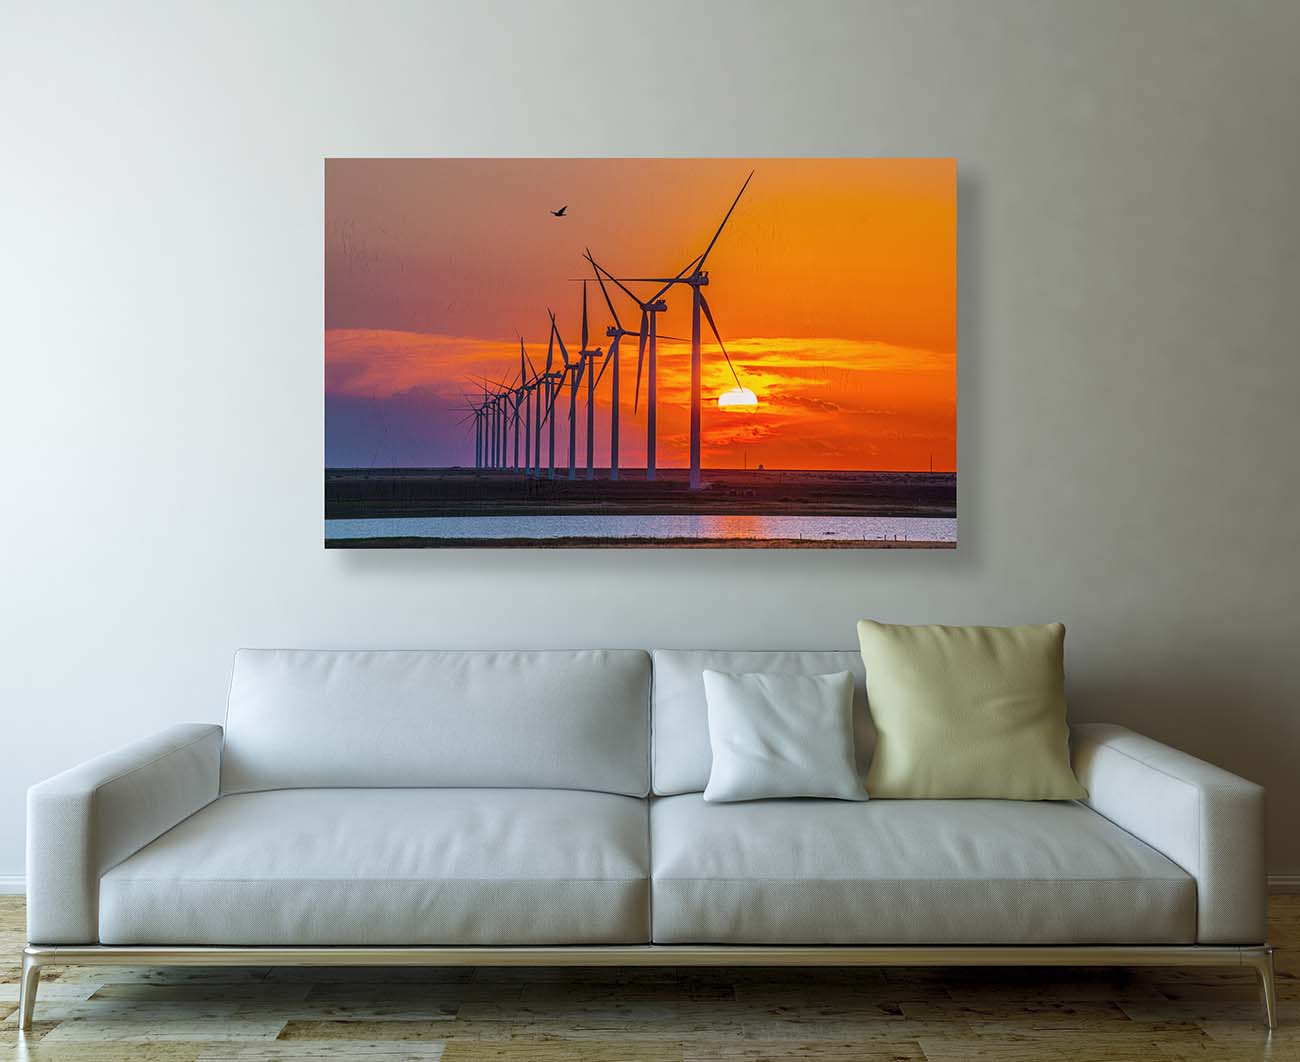 Sunset Turbines photograph by Doug LaRue large print over a white couch